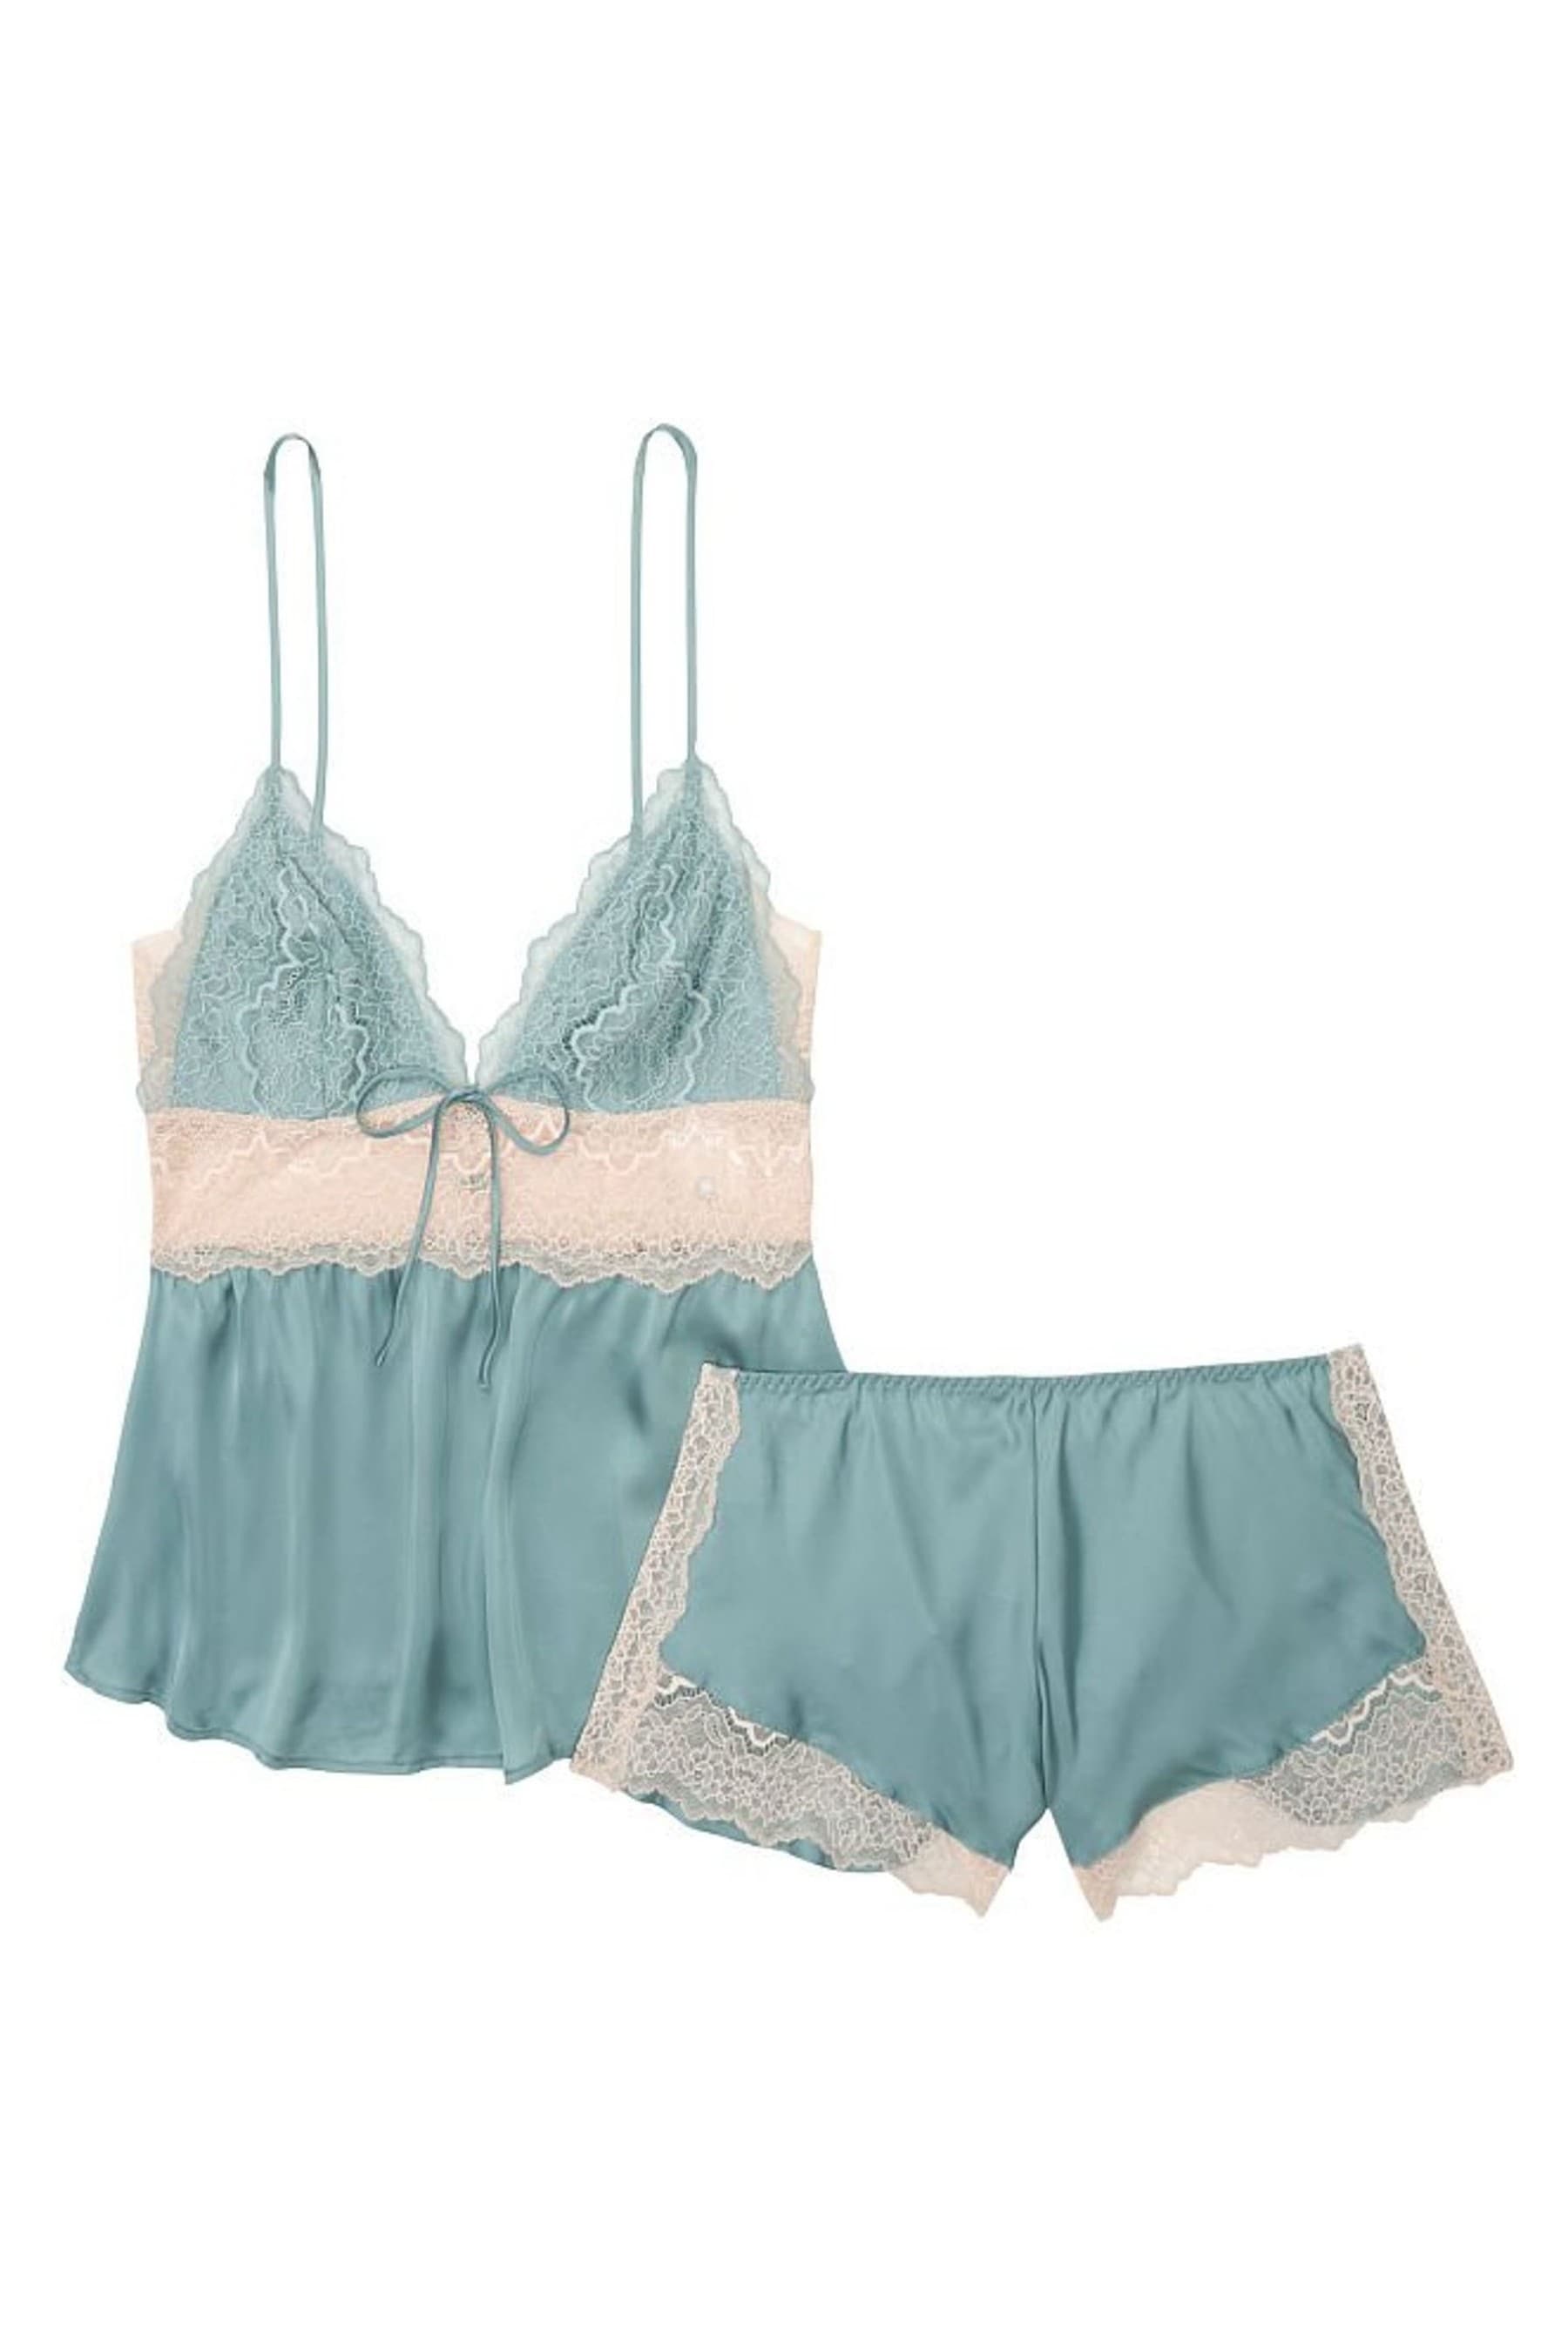 Buy Victoria S Secret Stretch Lace And Satin Cami Set From The Victoria S Secret Uk Online Shop